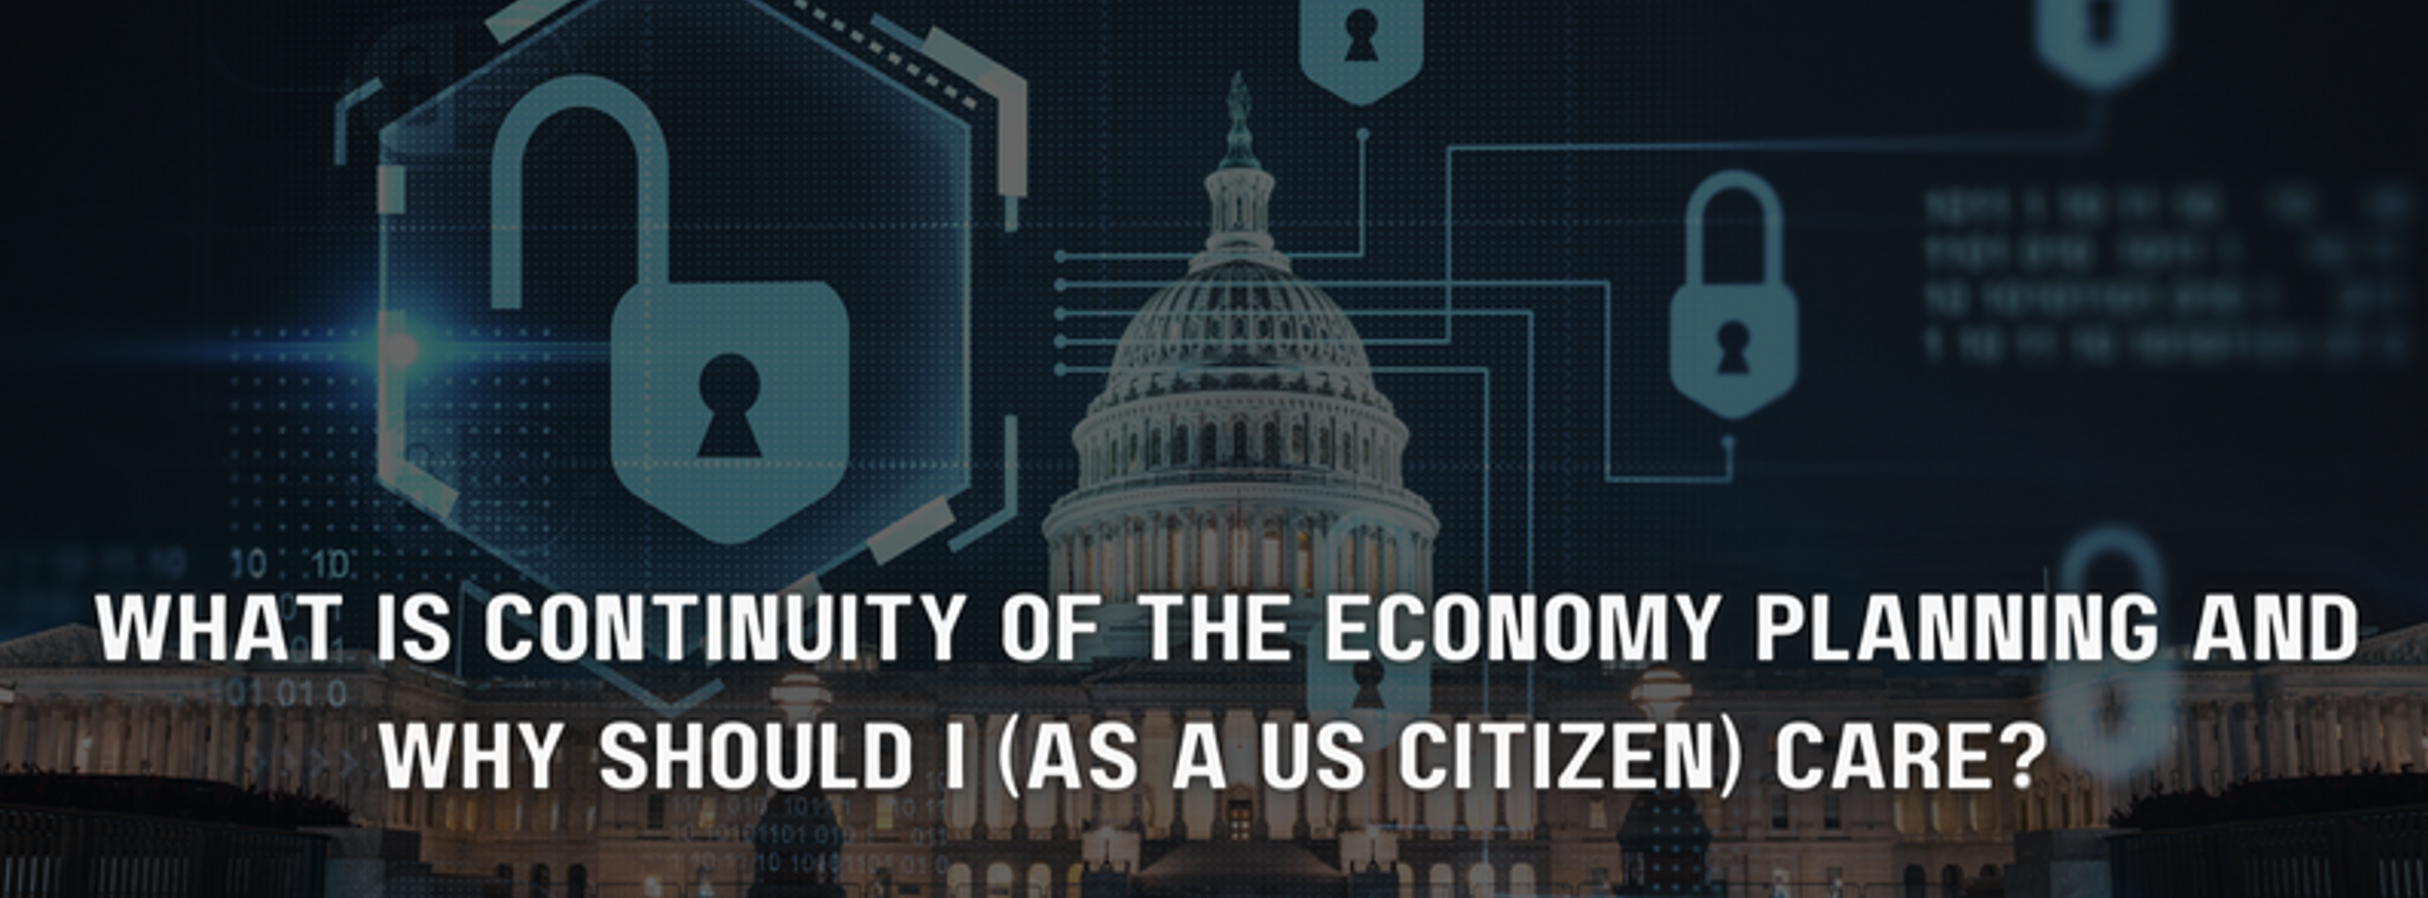 What is Continuity of the Economy Planning and Why Should I (as a US Citizen) Care?